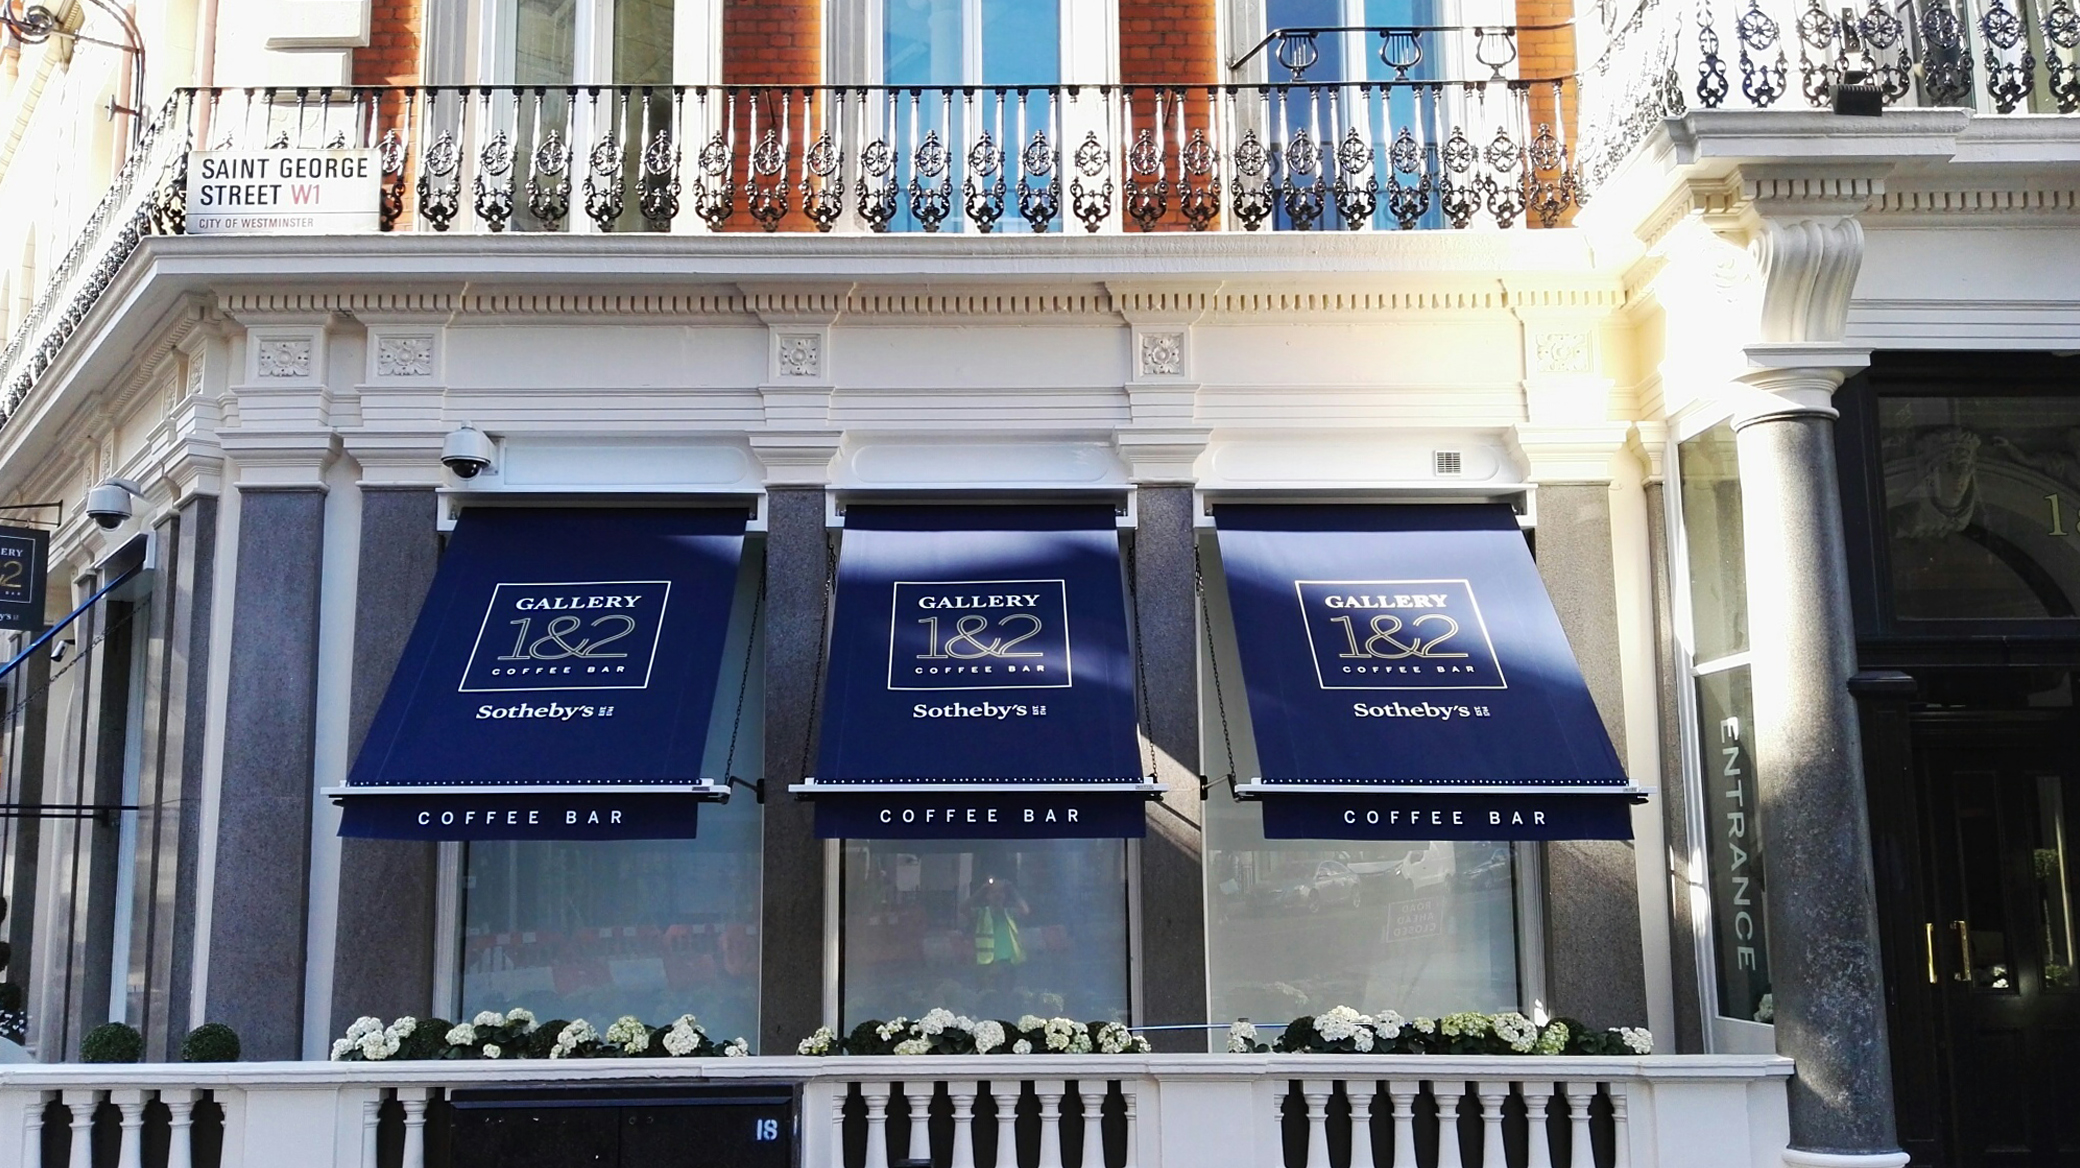 Sotheby's cafe awning